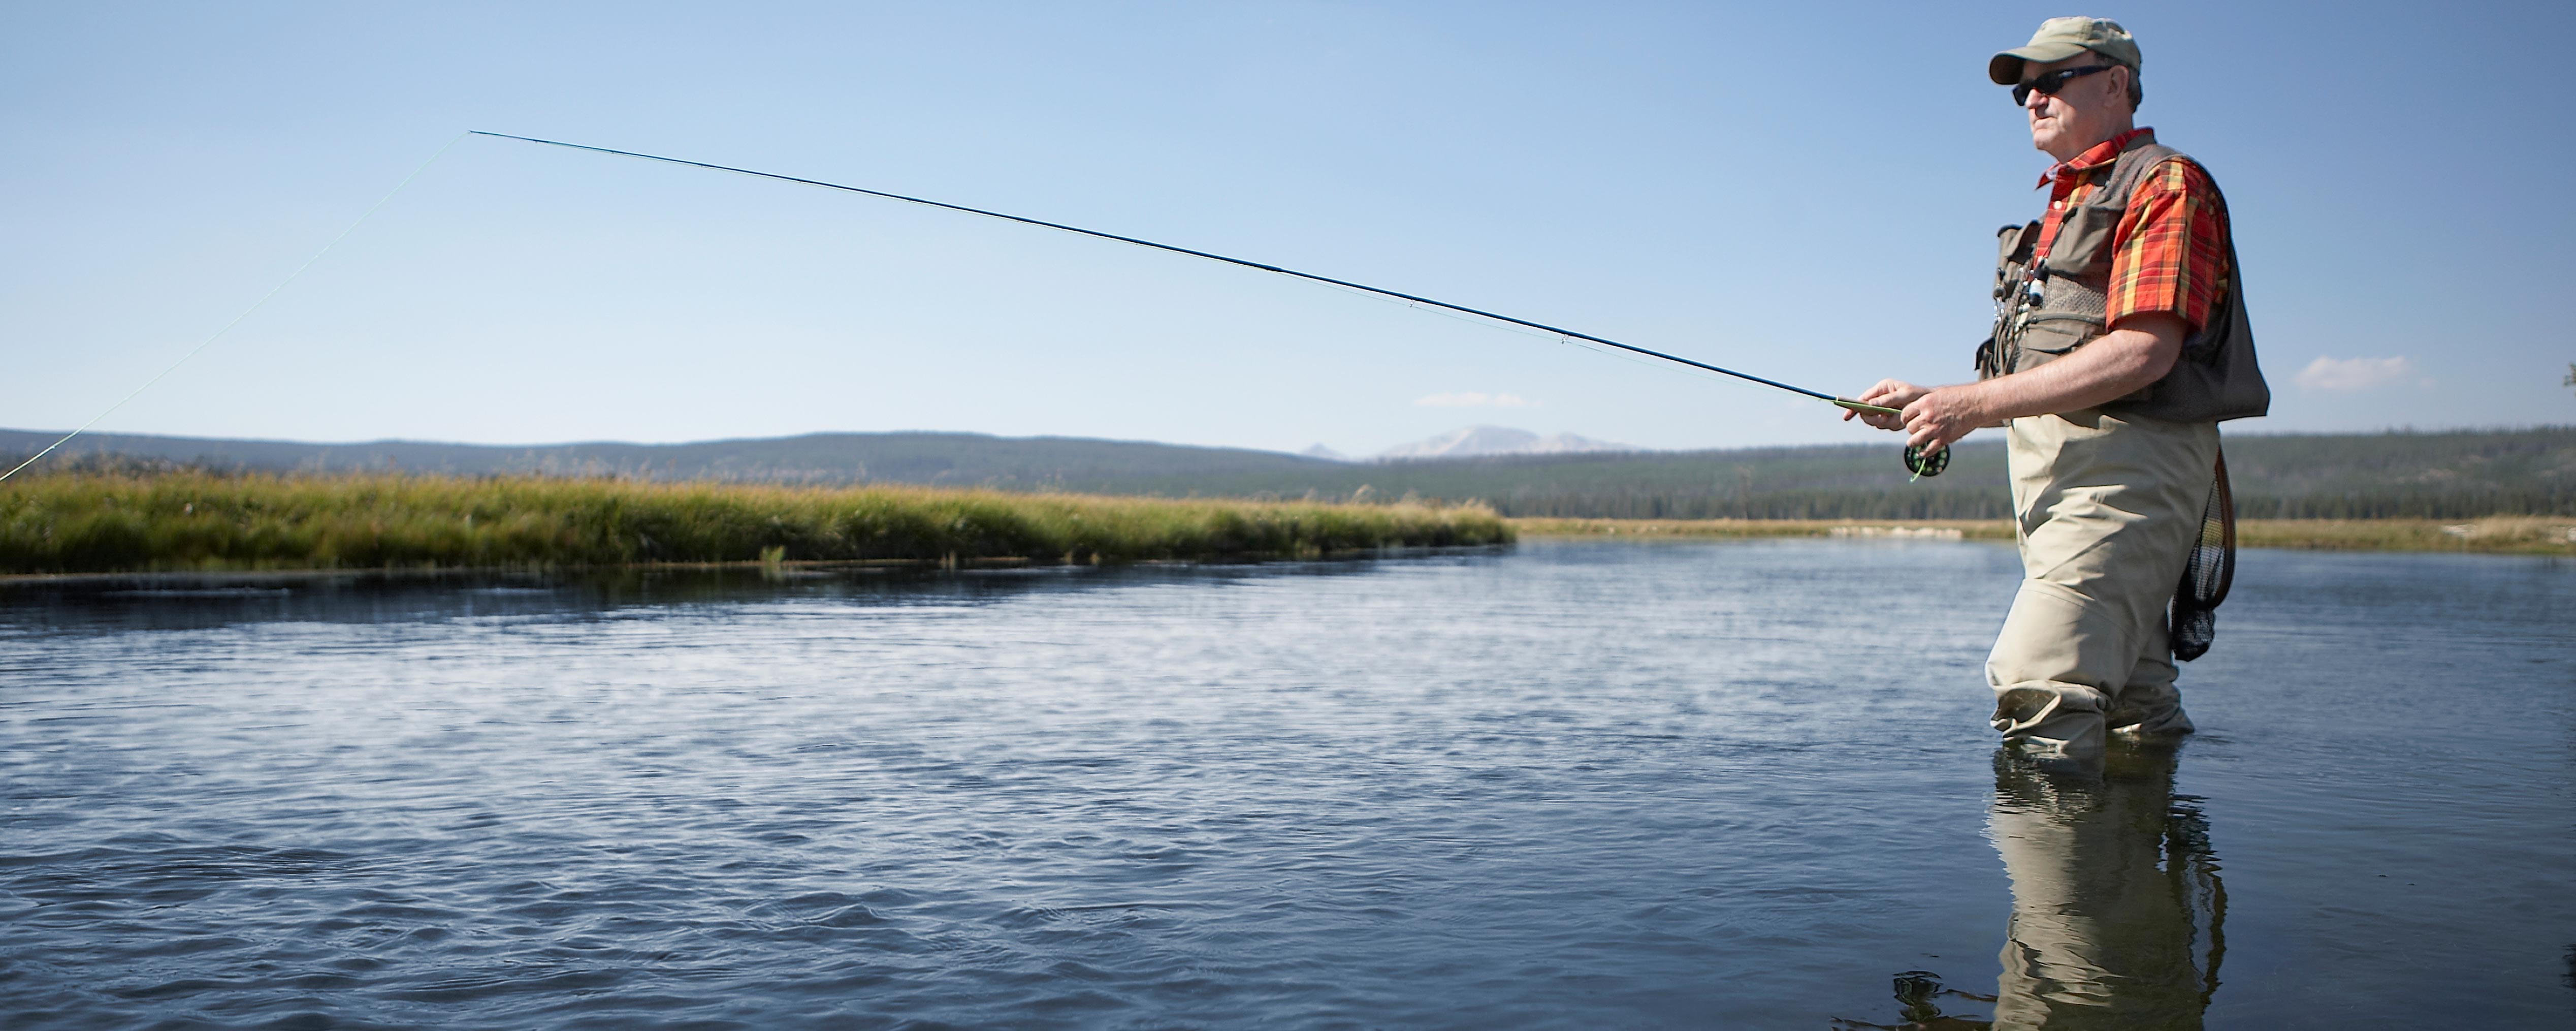 Get a Freshwater Fishing License | The State of New York